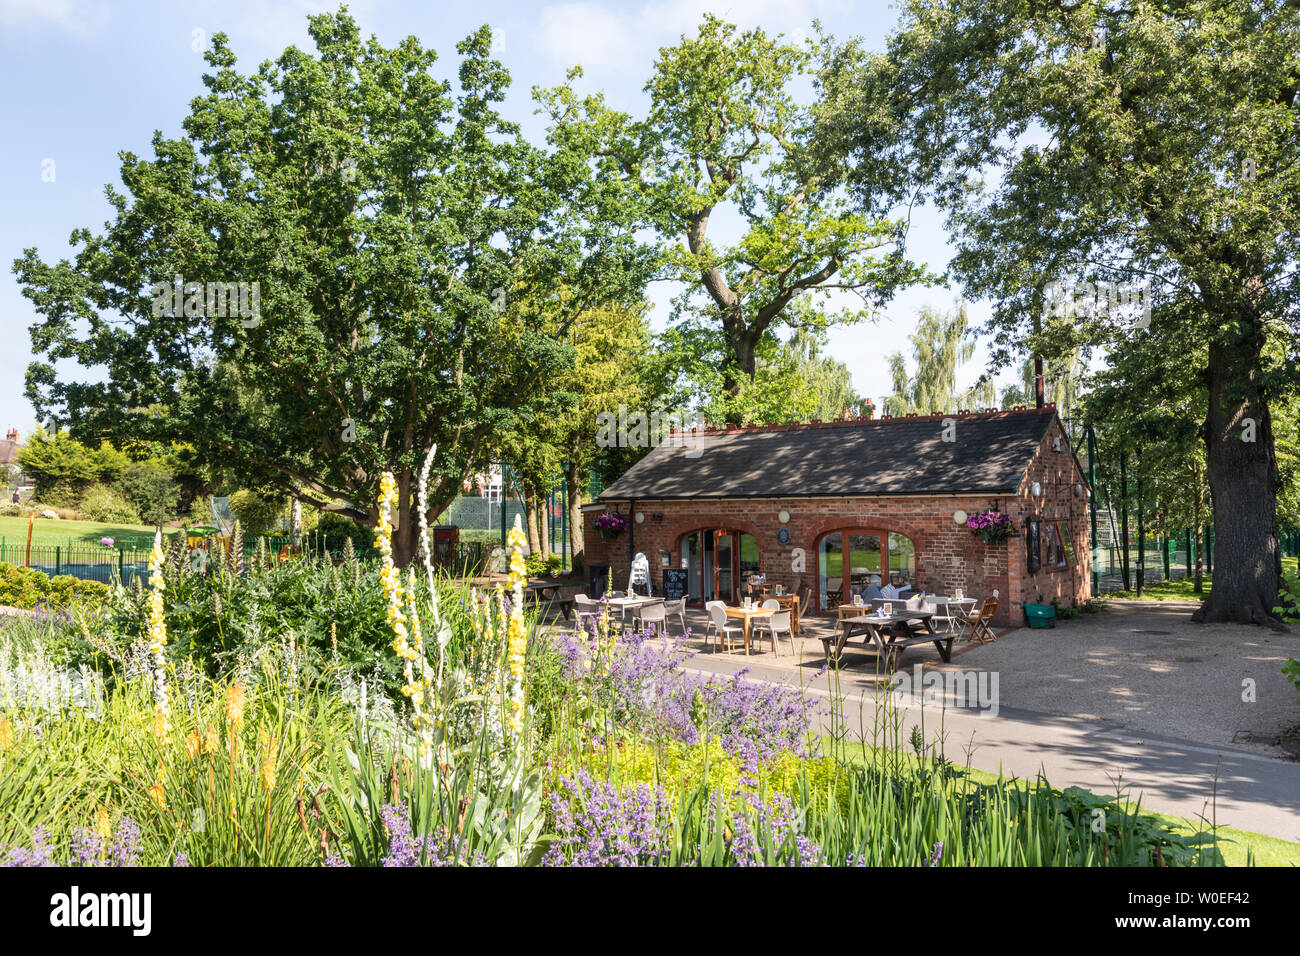 Rugby Warwickshire, UK: Tool Shed Cafe with alfresco seating, is in a small brick building set amongst trees and flowers in Caldecott Park. Stock Photo